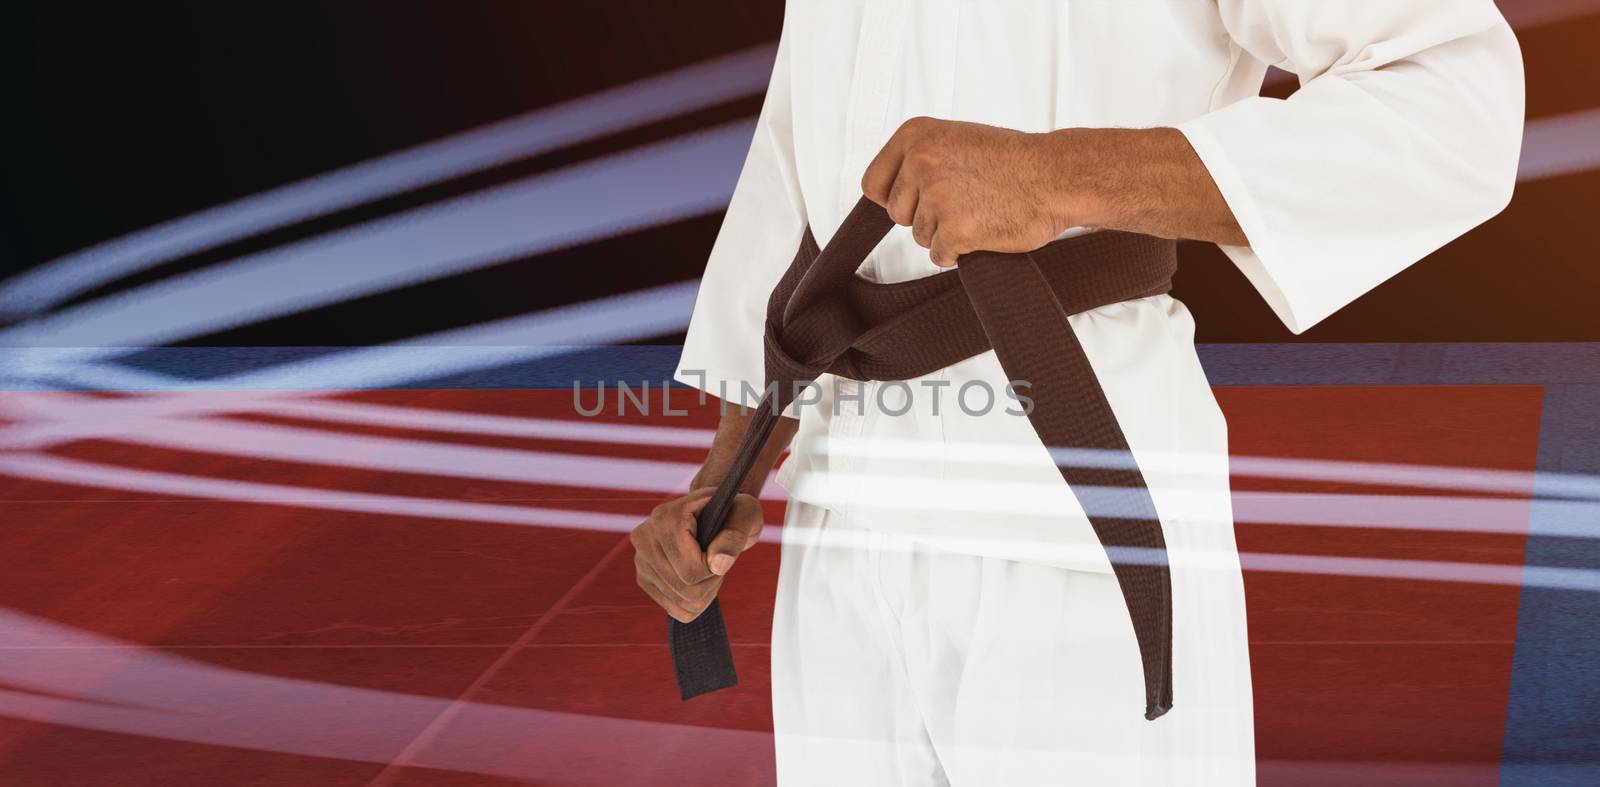 Fighter tightening karate belt against overhead view of playing field